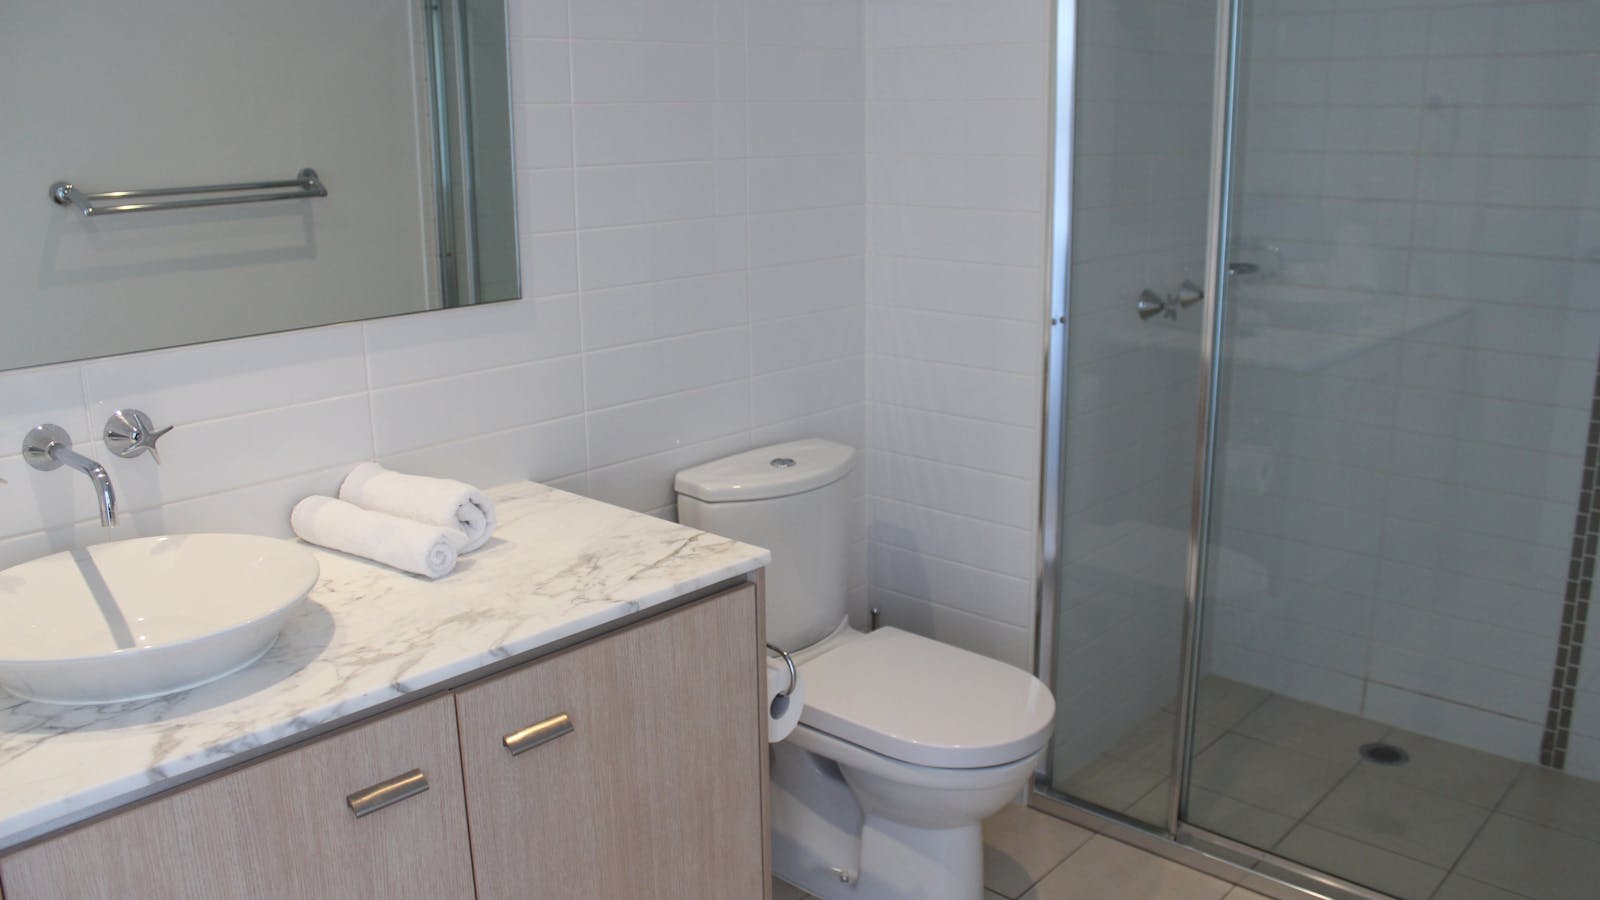 Studio apartment bathroom with walk in shower, toilet, and bathroom sink